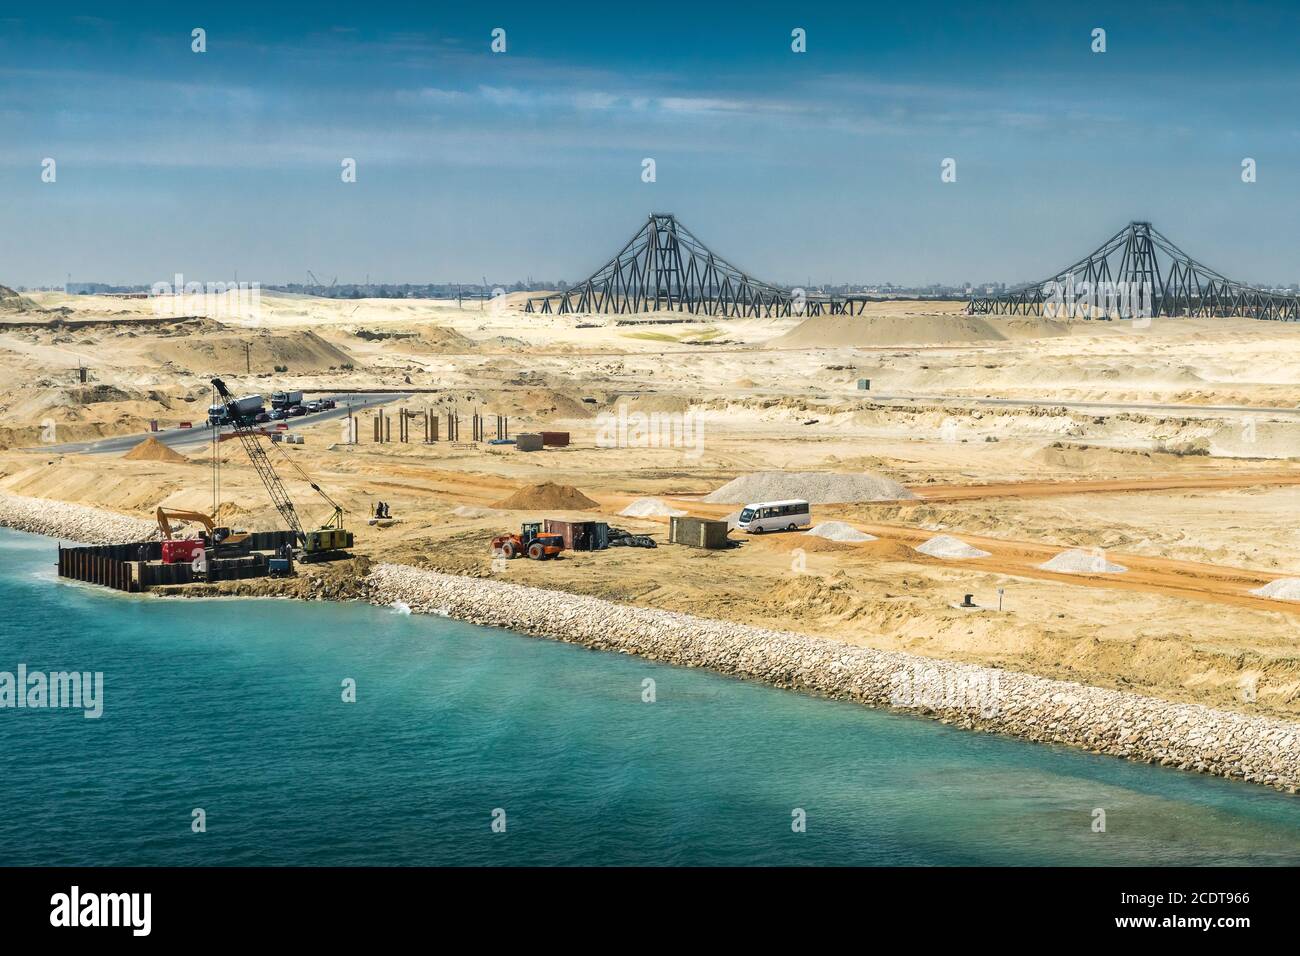 View from the newly opened extension channel of the Suez Canal to the El Ferdan Bridge Stock Photo